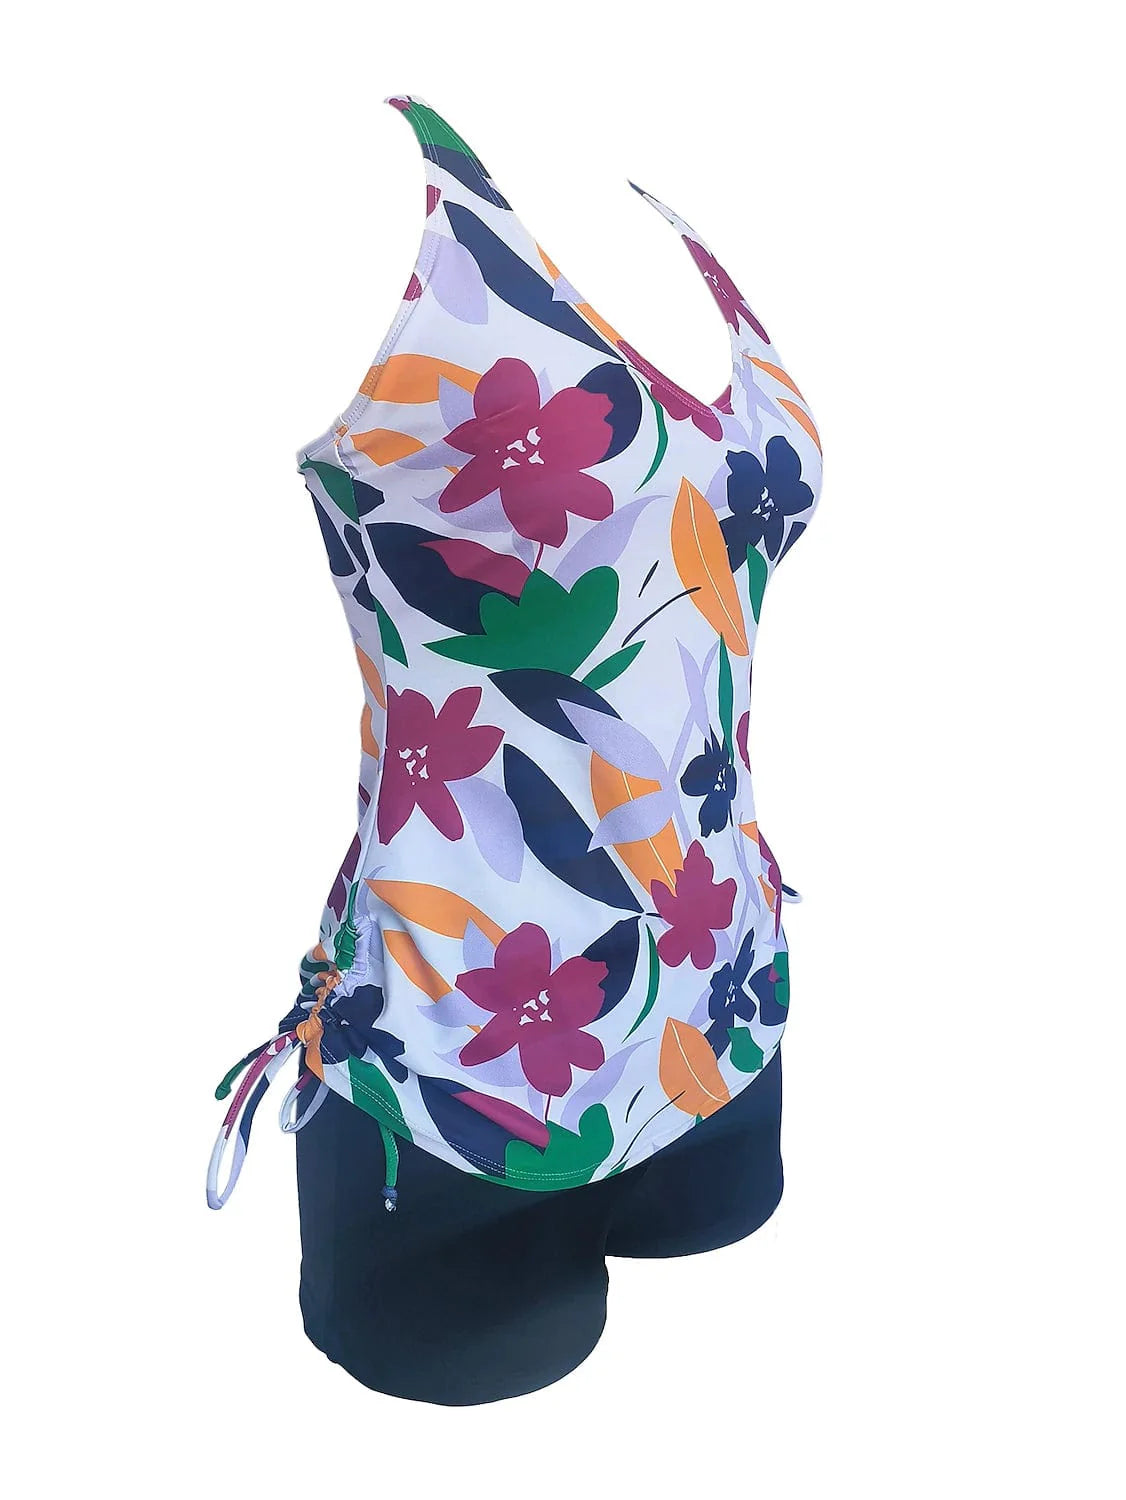 Elegant Floral Tankini 2 Piece Swimsuit with Padded Bra and Drawstring